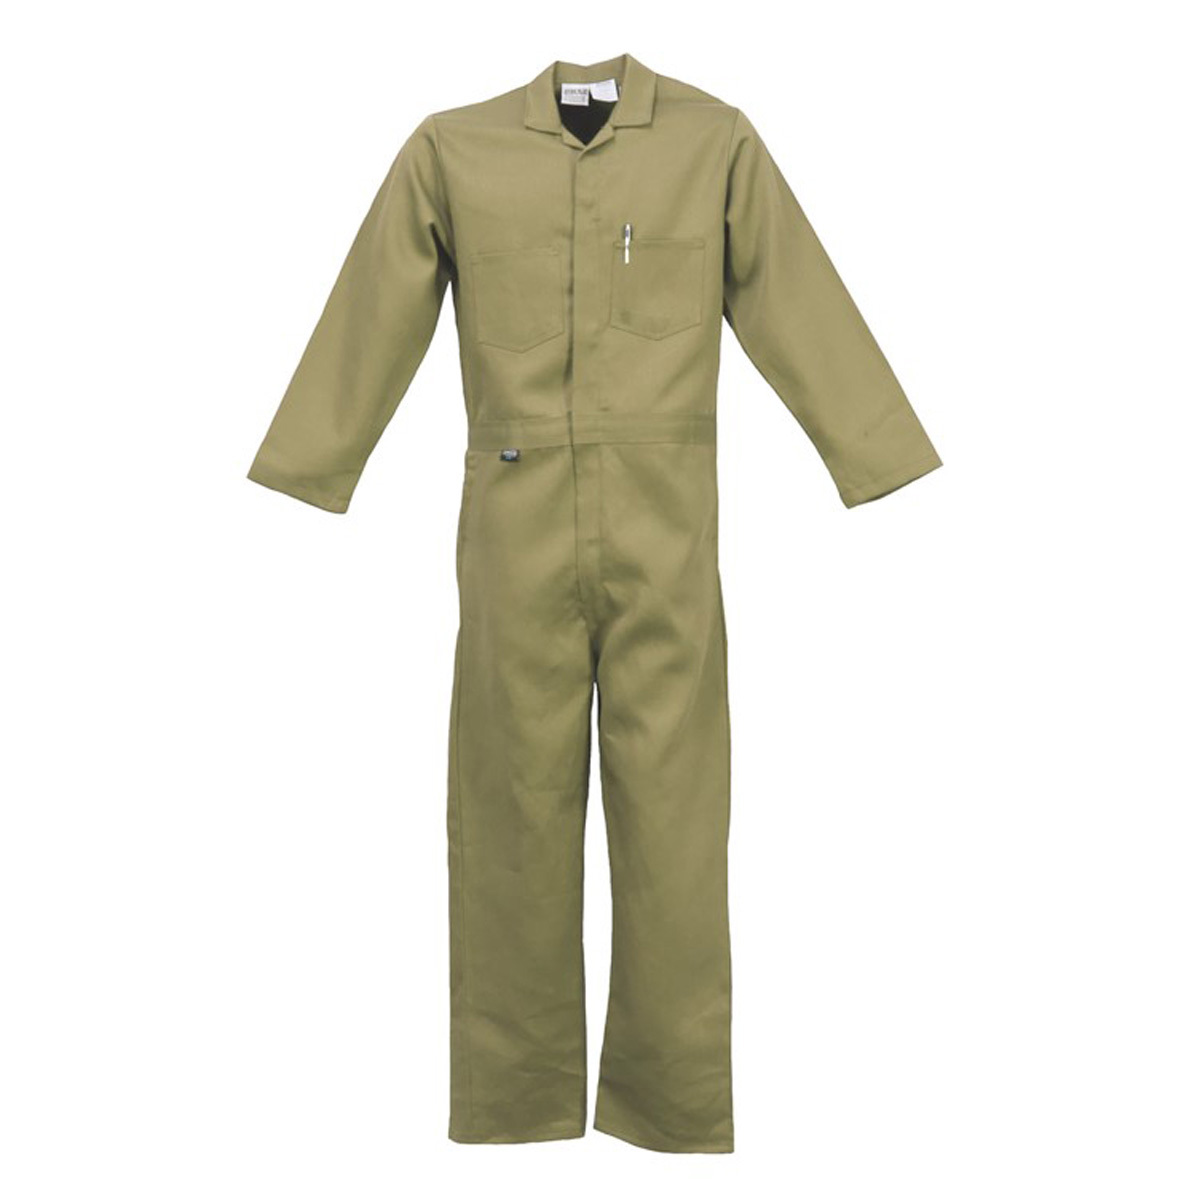 Stanco Safety Products™ Small Tan Indura® Arc Rated Flame Resistant Coveralls With Front Zipper Closure